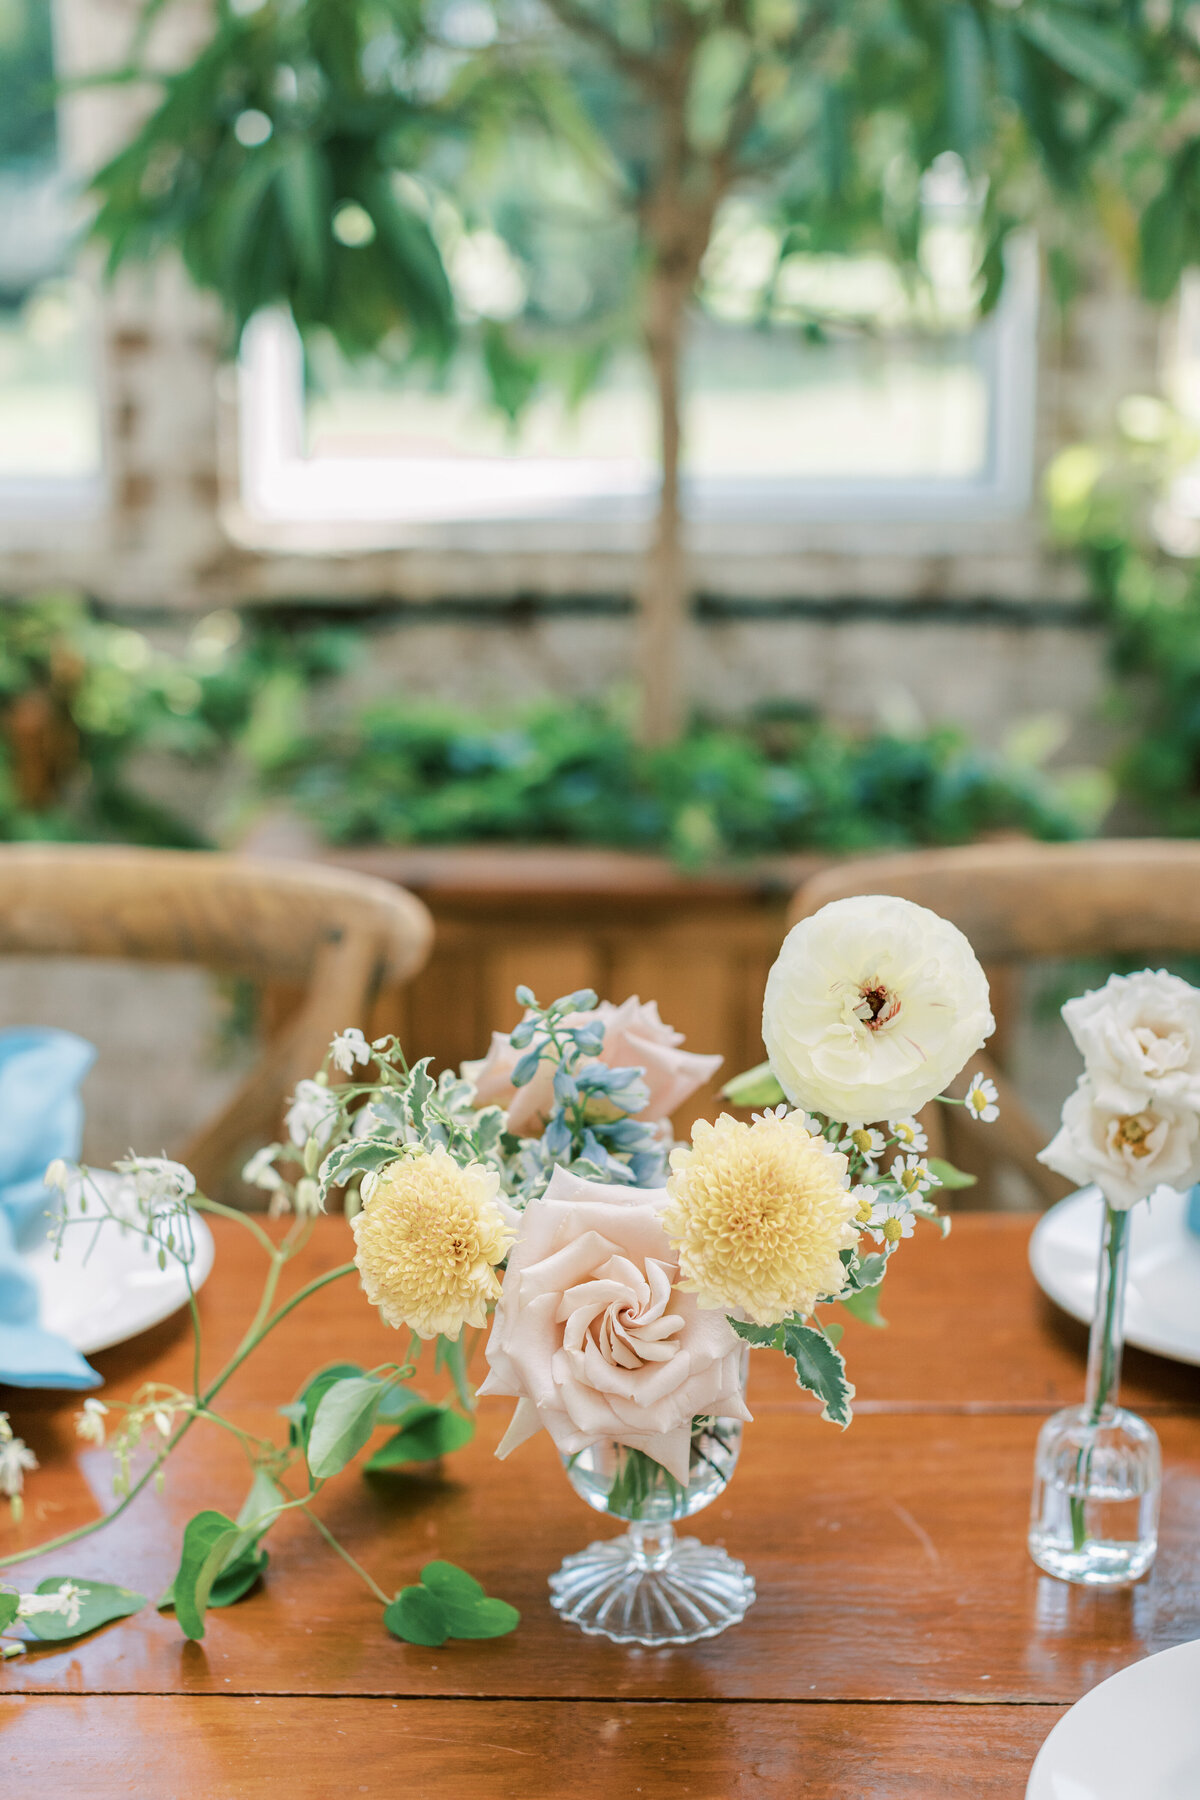 A pastel floral centerpiece sits on the wooden table.